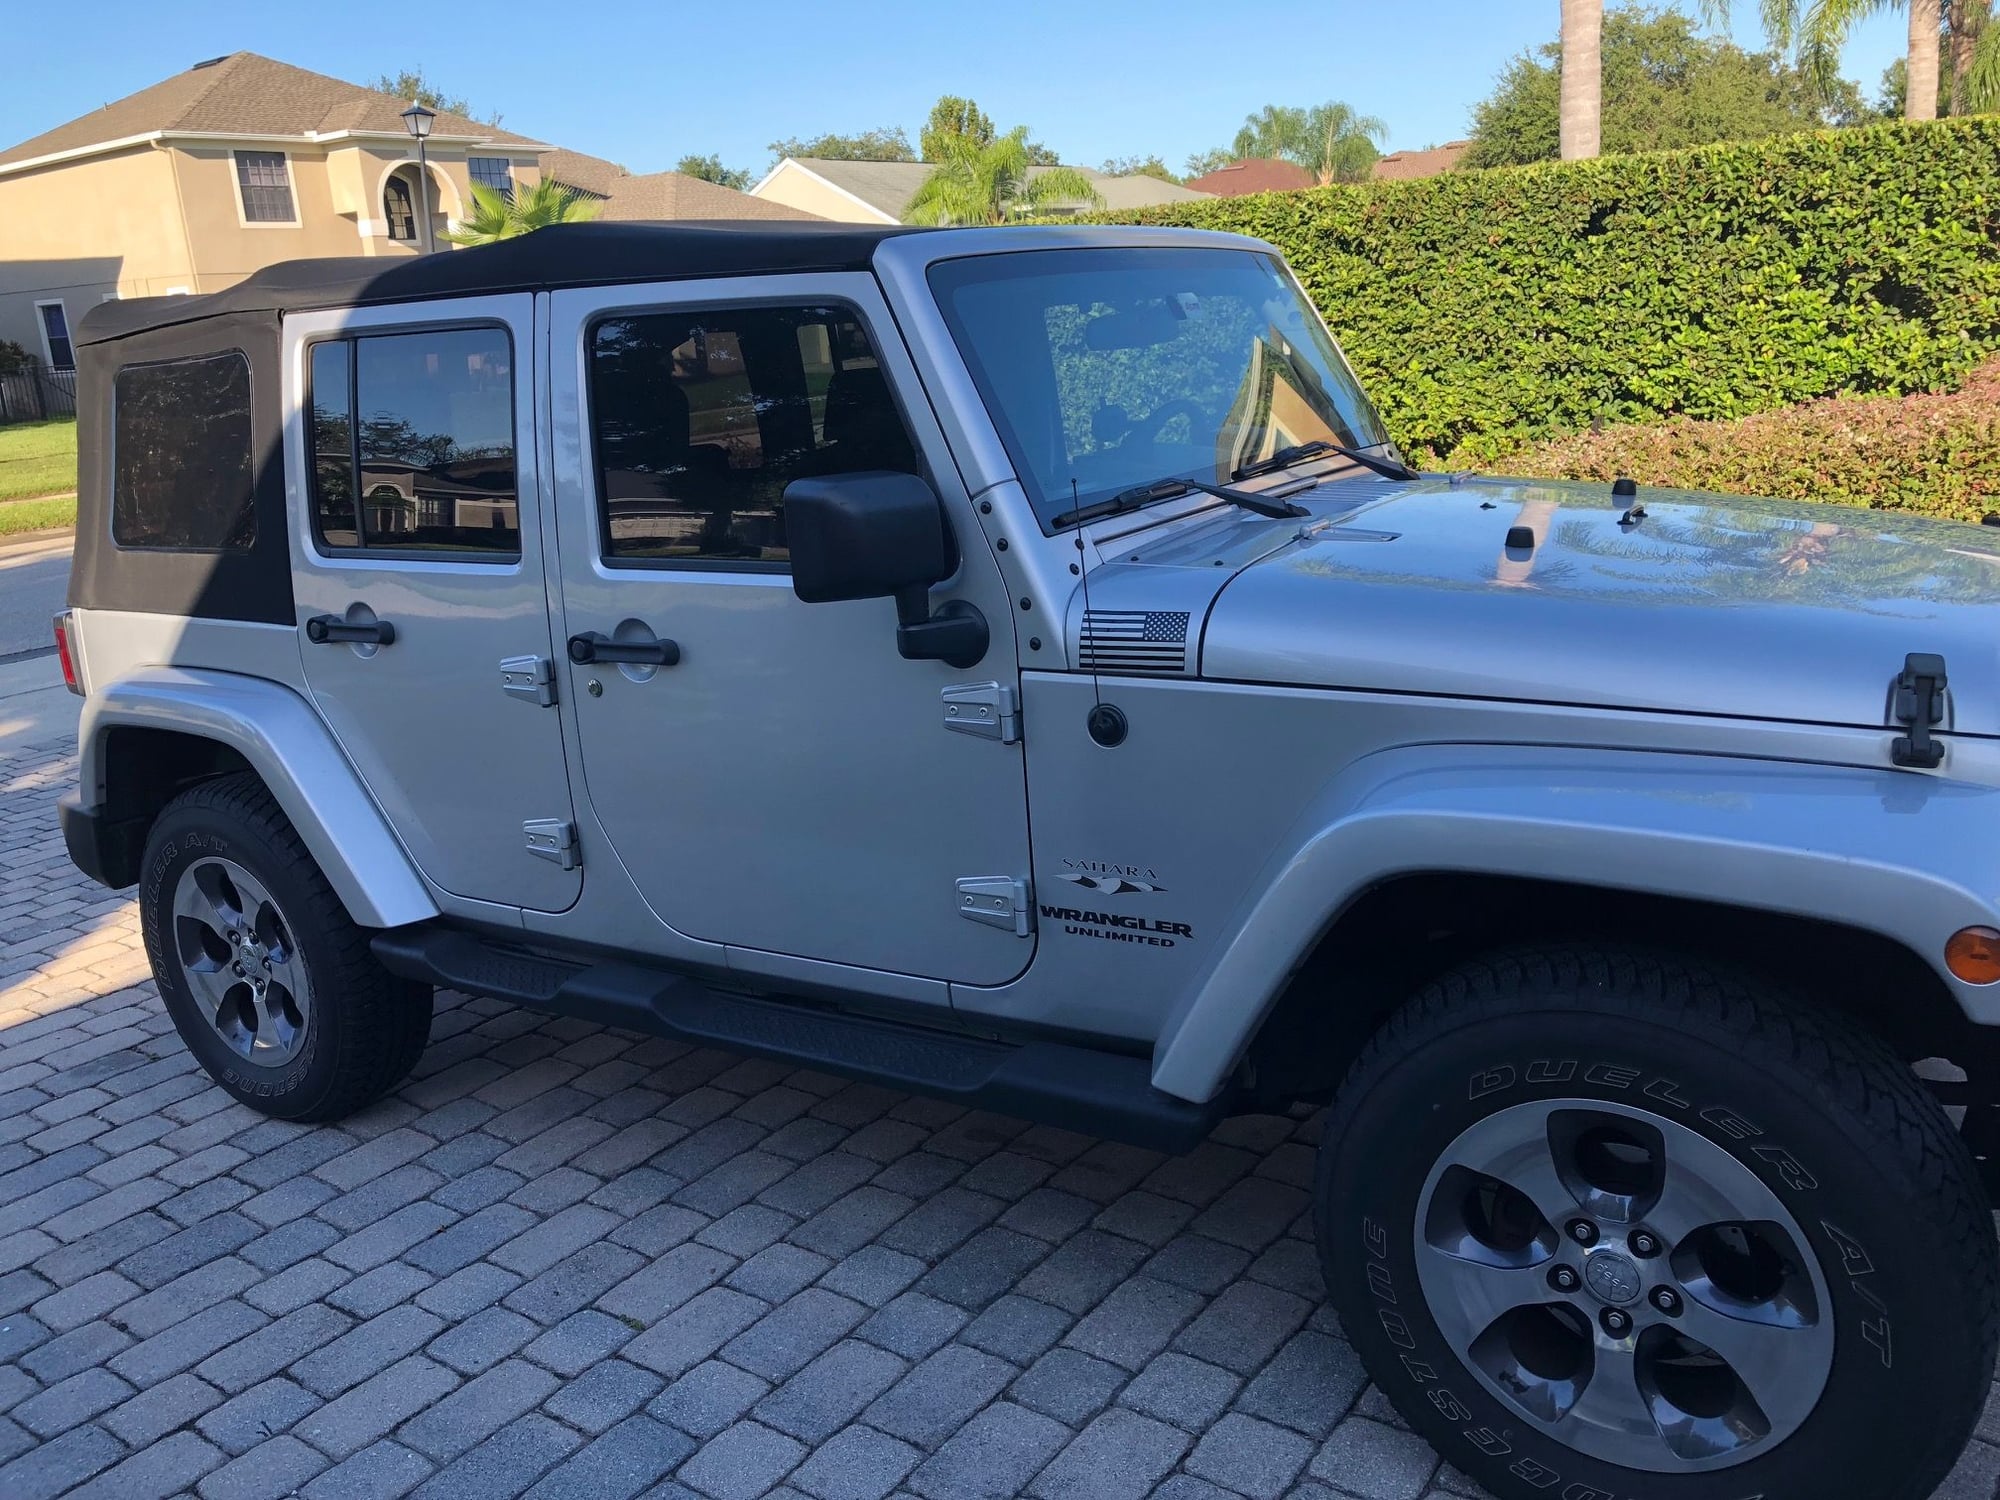 2008 Jeep Wrangler Unlimited Sahara 97,000 miles  - The top  destination for Jeep JK and JL Wrangler news, rumors, and discussion